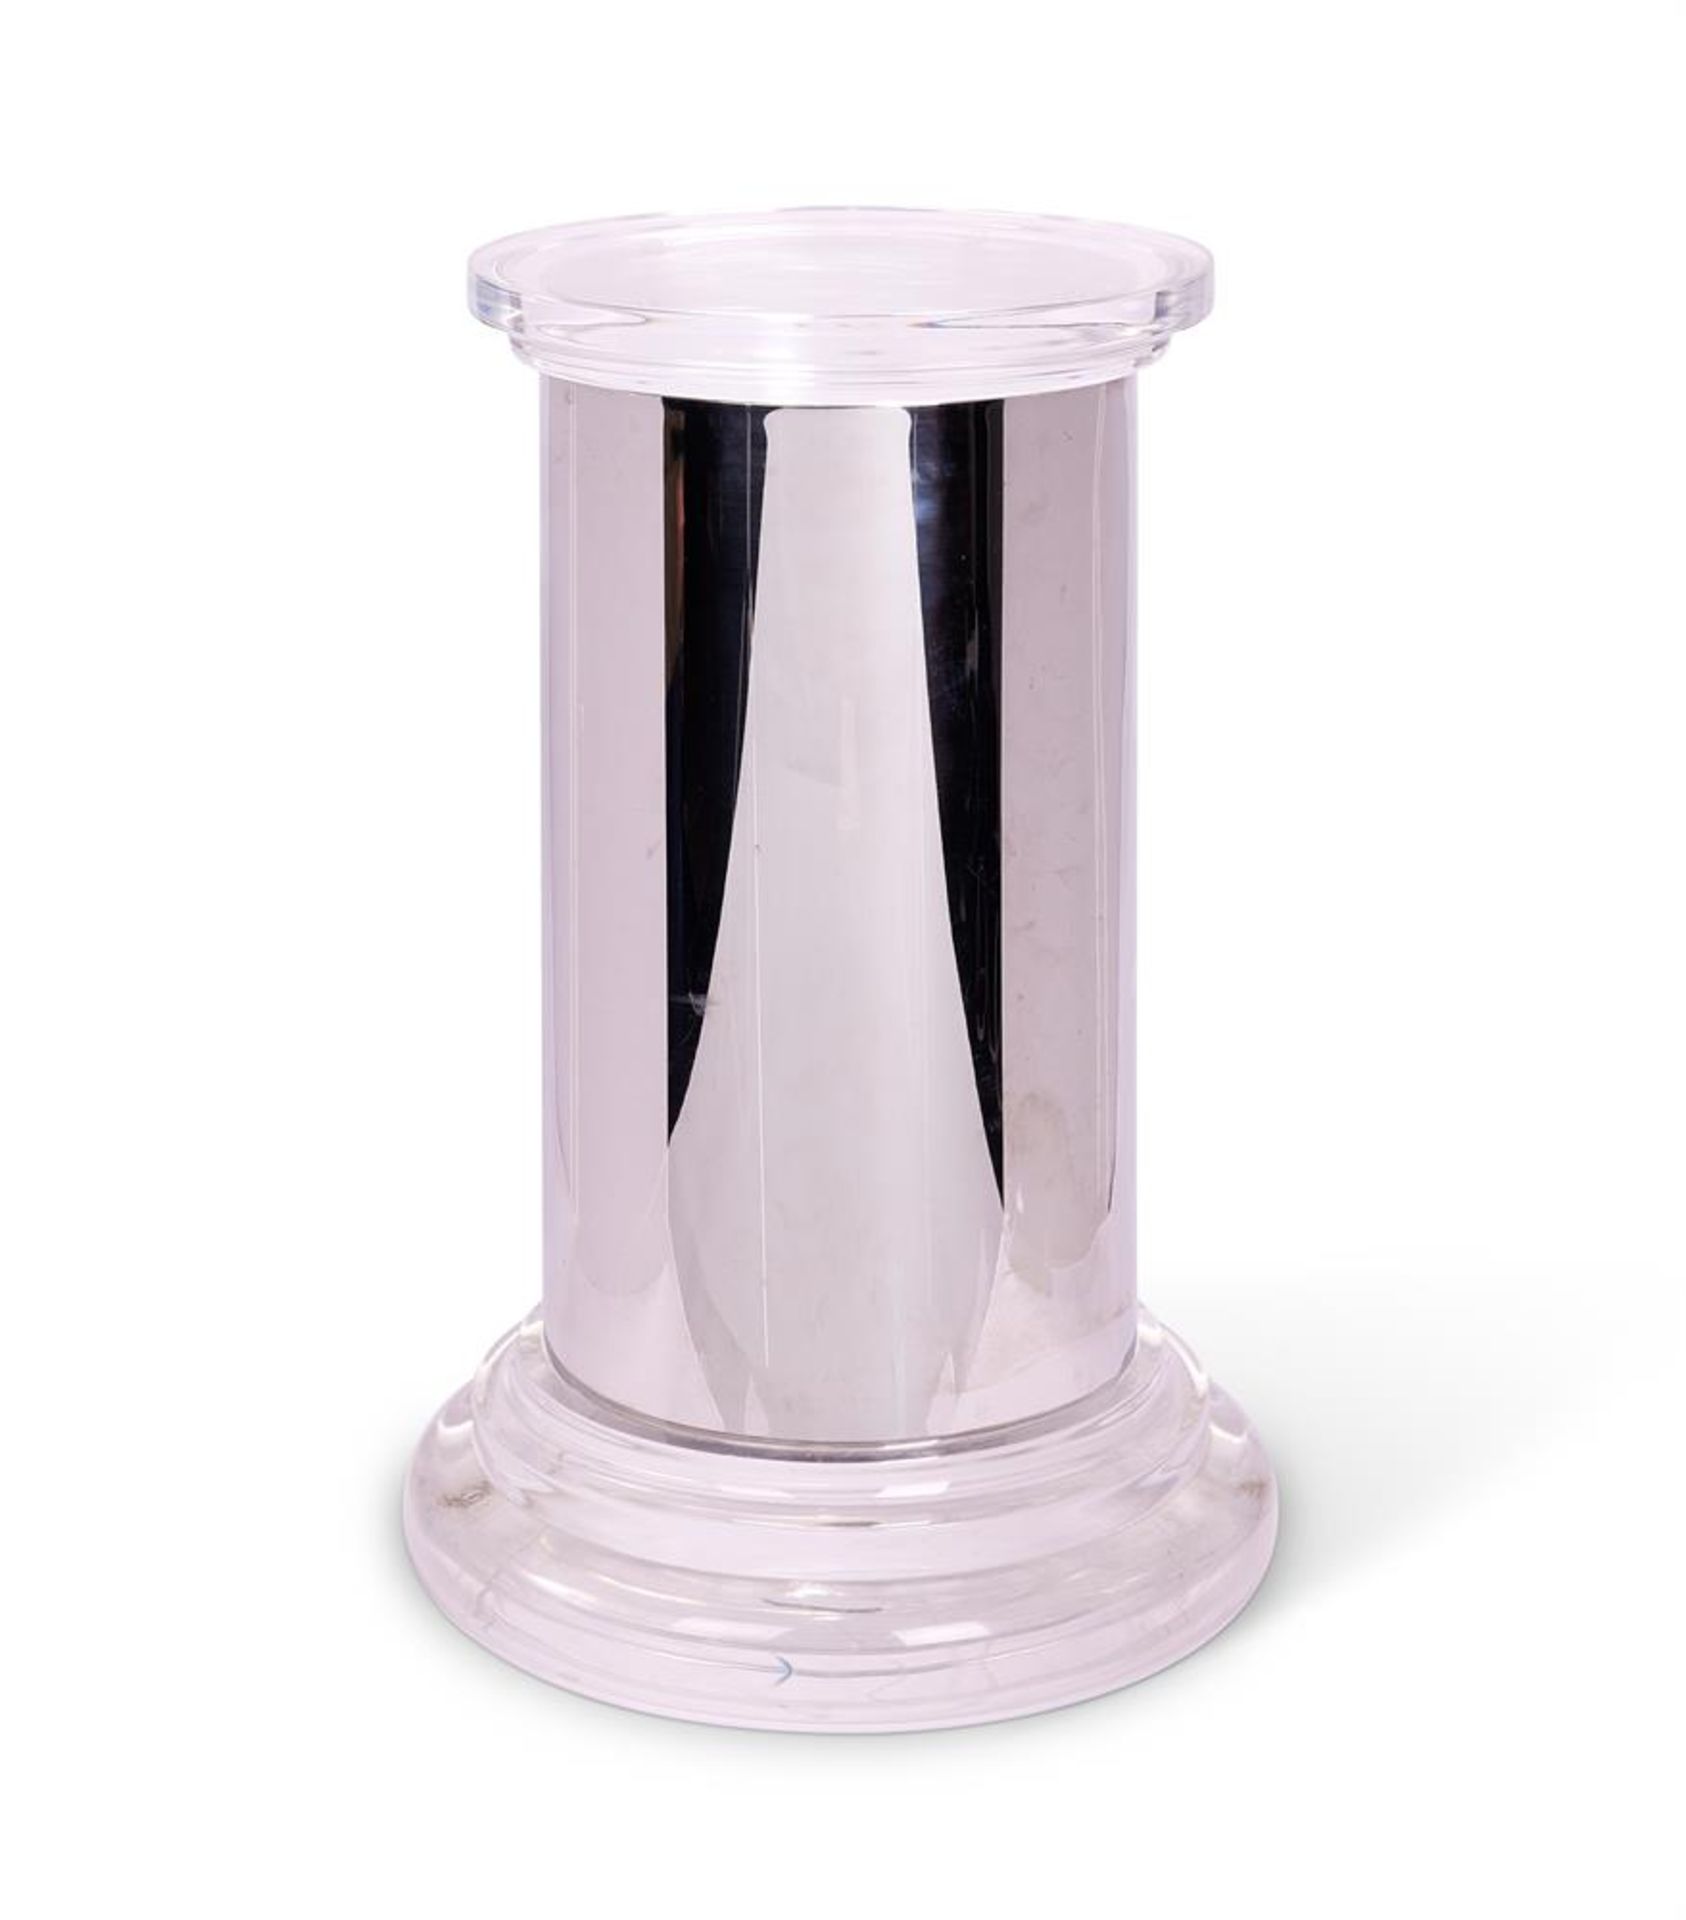 A LUCITE AND STEEL WRAPPED PEDESTAL, CIRCA 1970